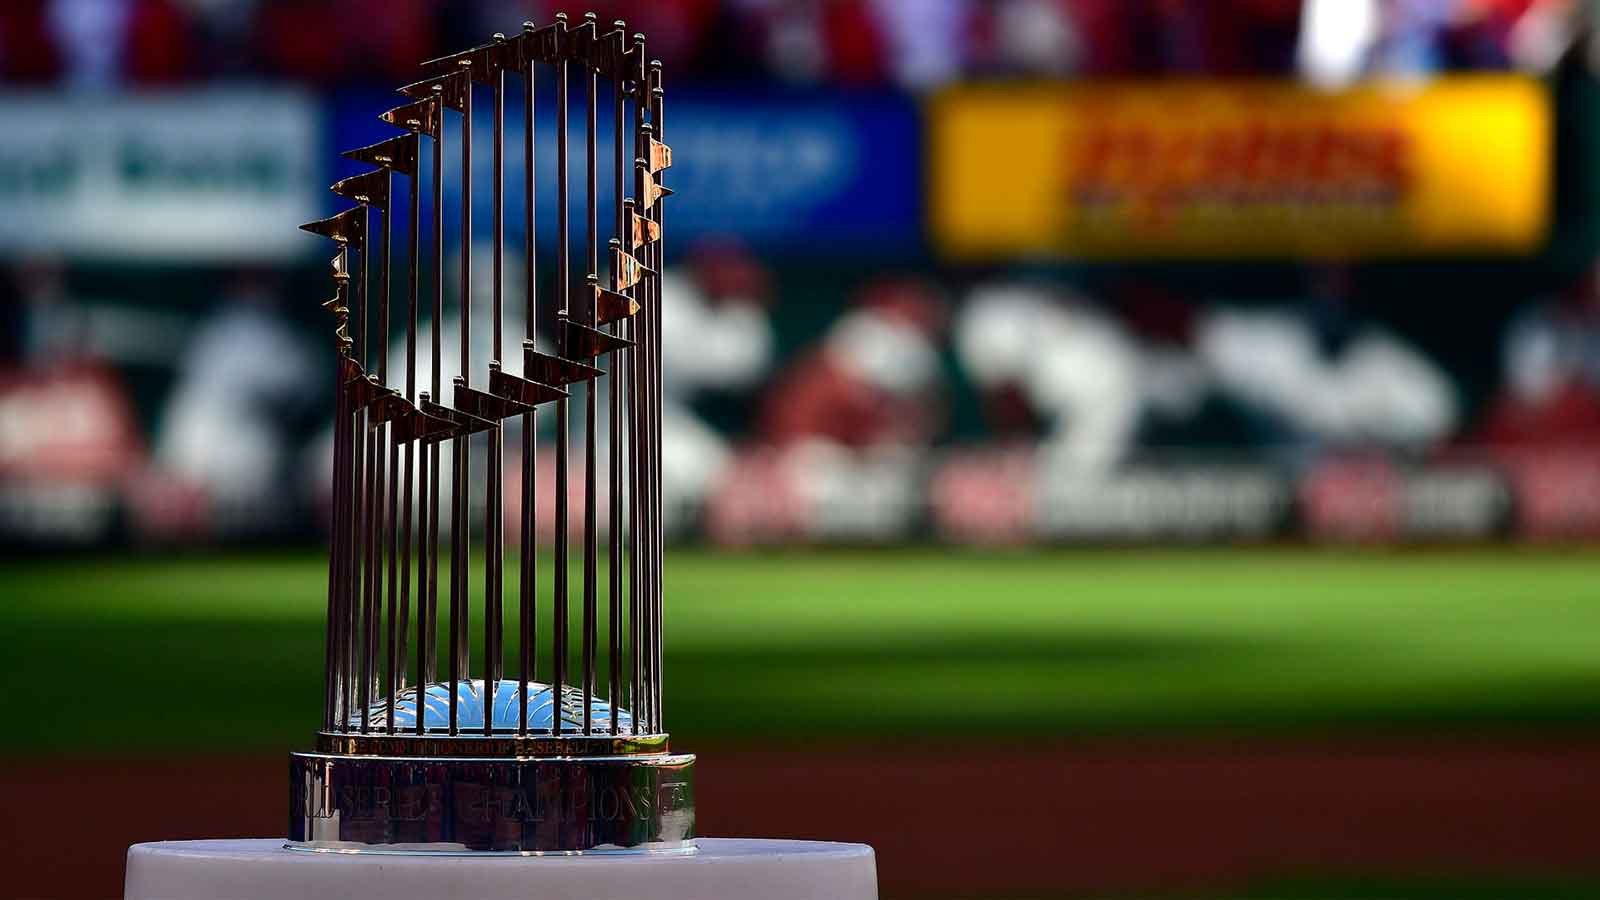 When do the 2022 MLB playoffs start? Here's the full schedule